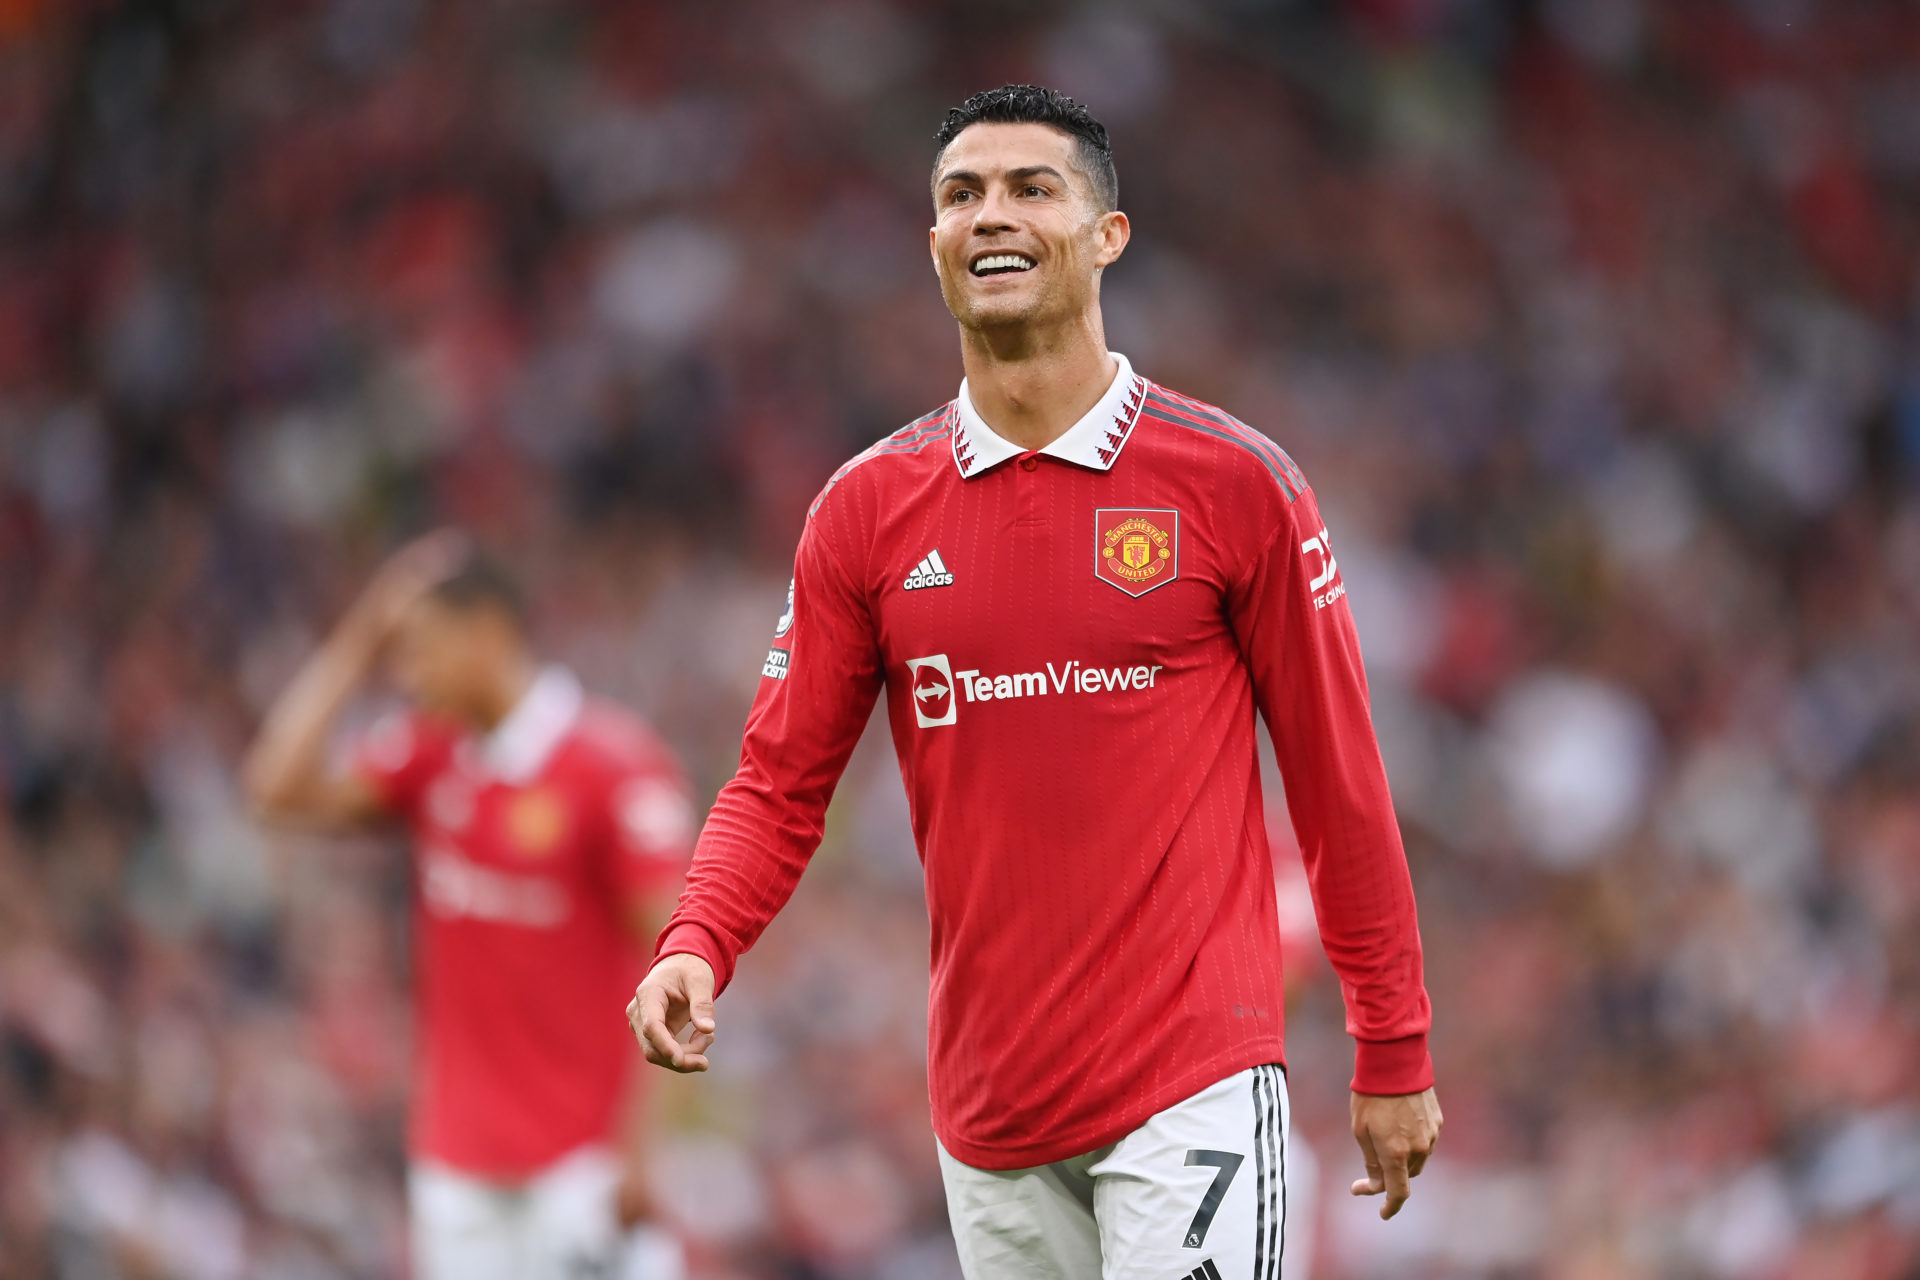 Manchester United may already have Cristiano Ronaldo's replacement